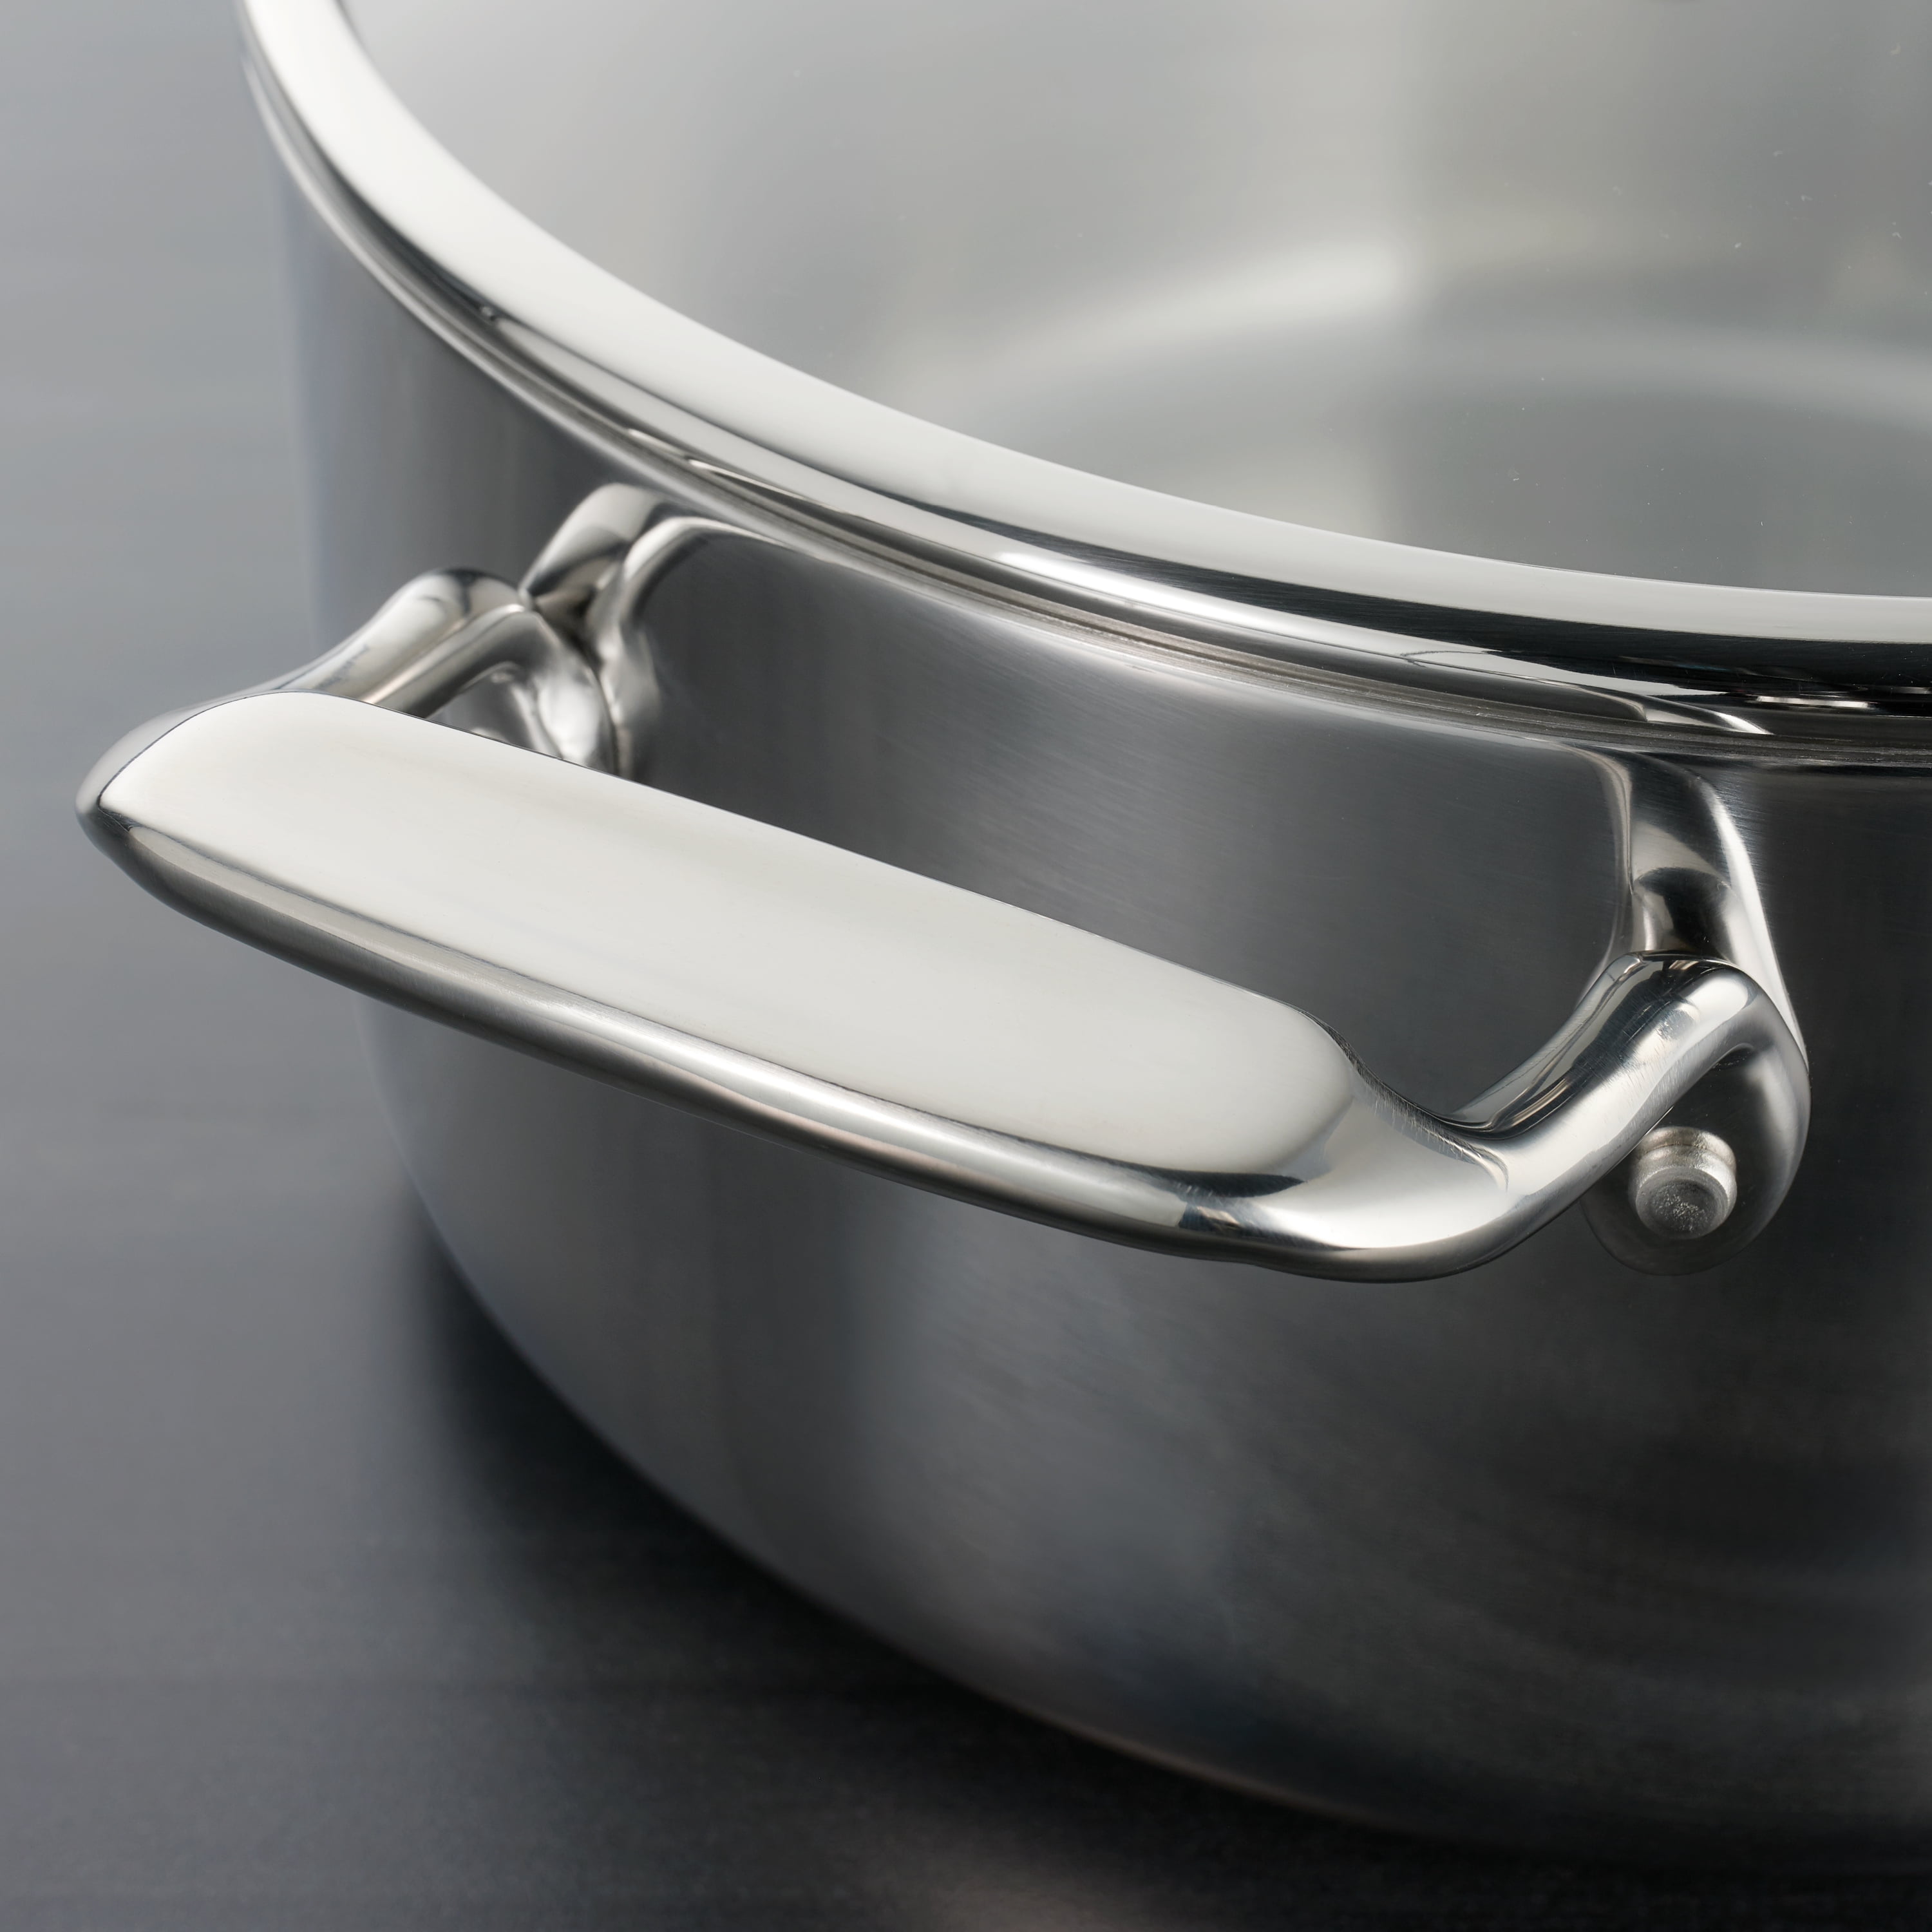 Tramontina Covered Sauce Pan with Helper Handle Stainless Steel Tri-Ply  Clad, 4-Quart, 80116/024DS